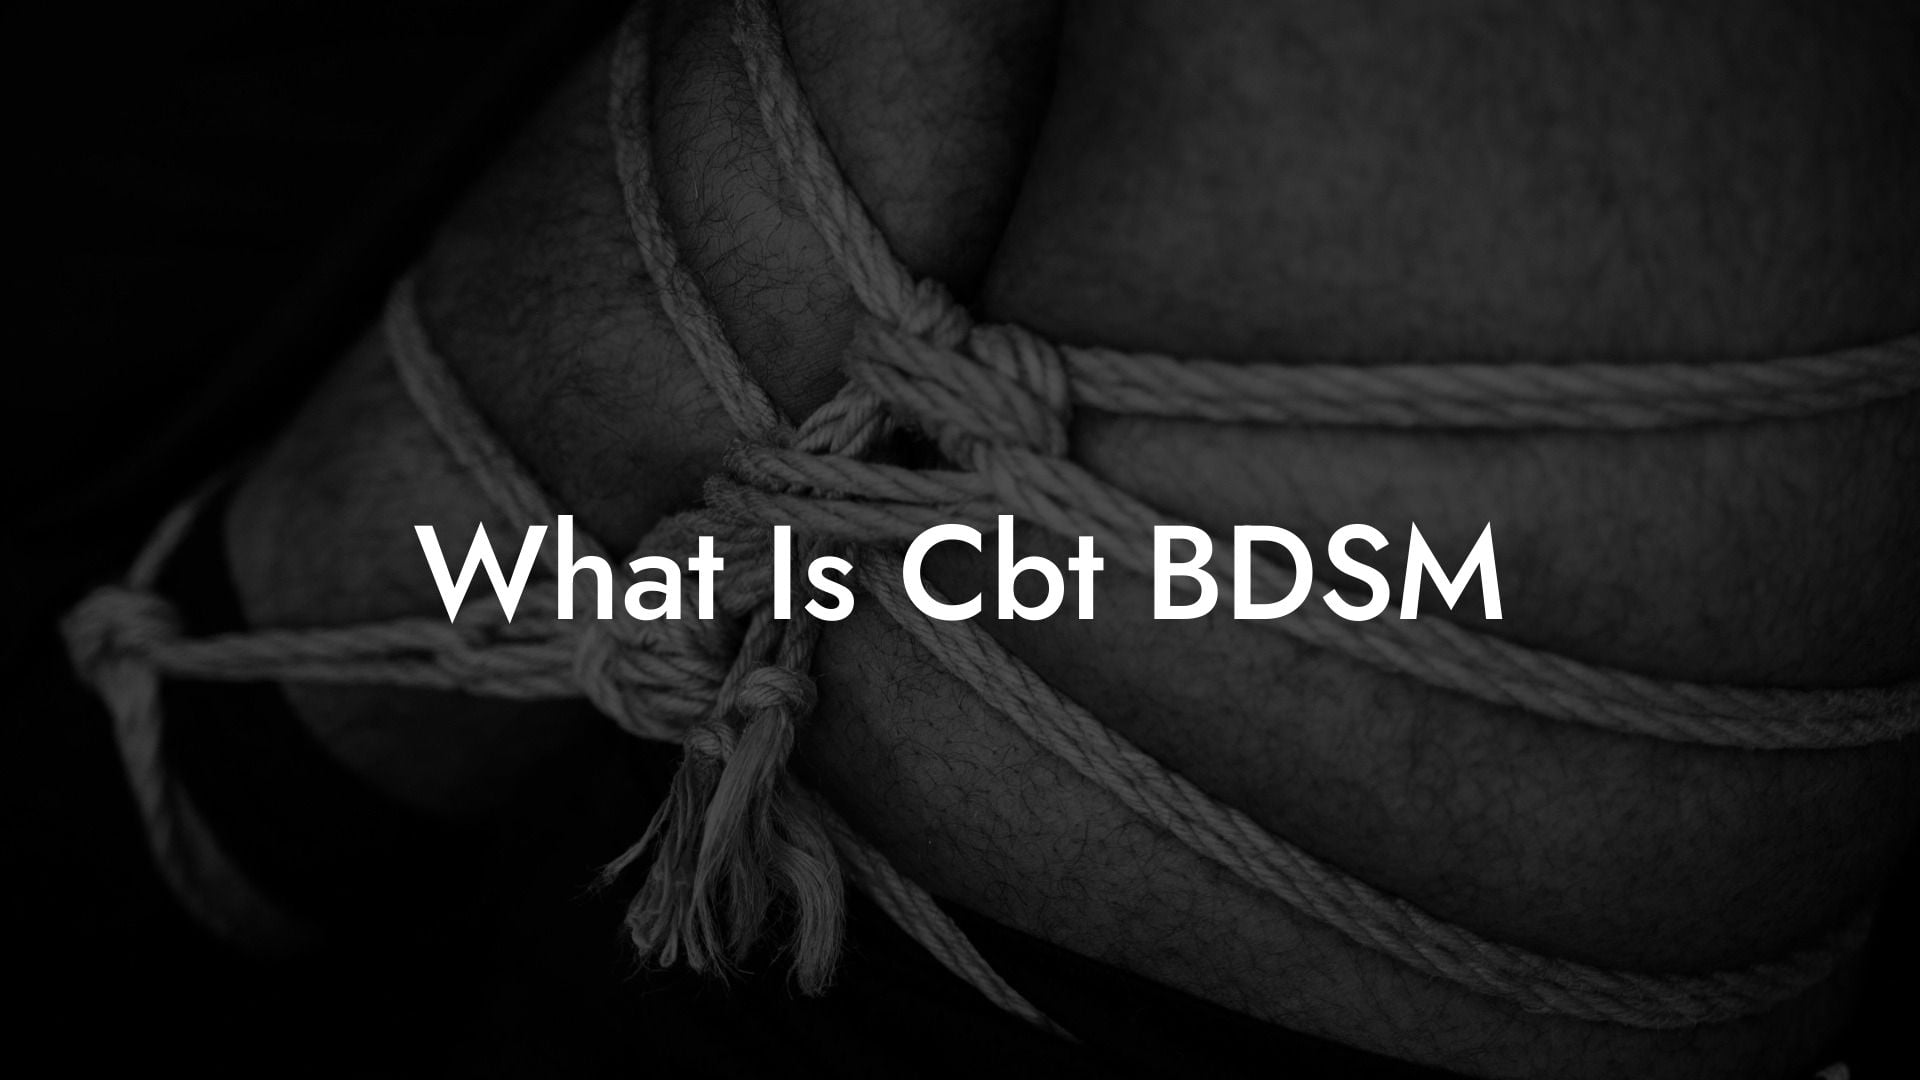 What Is Cbt BDSM